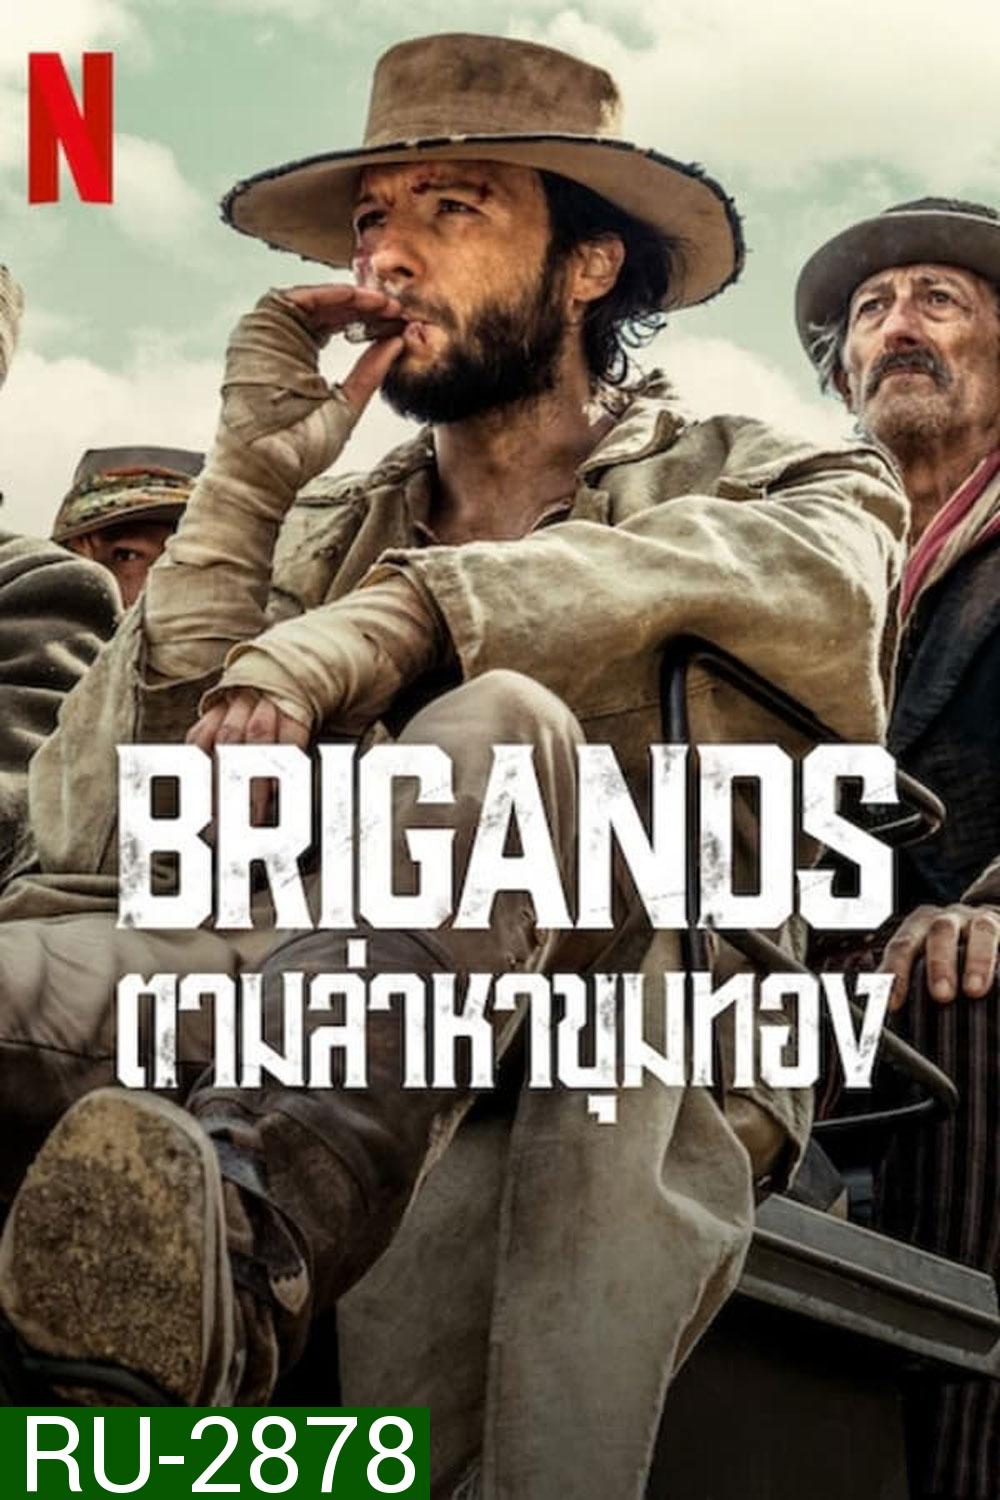 Brigands The Quest for Gold ตามล่าหาขุมทอง